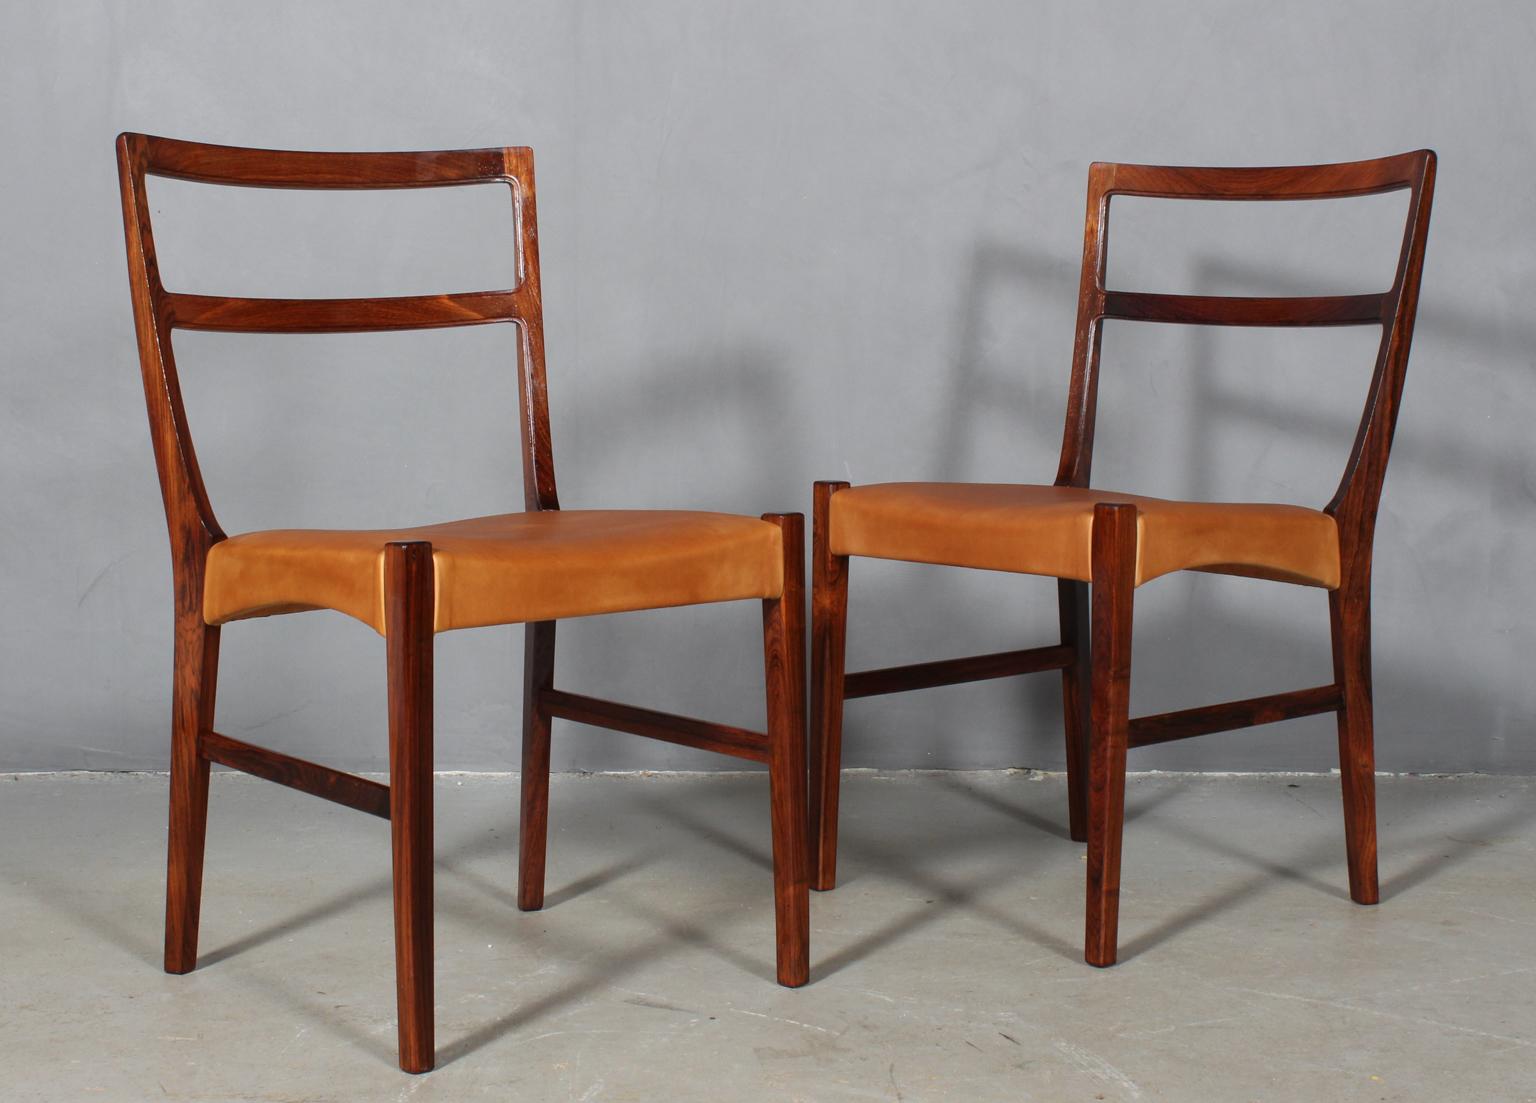 Scandinavian Modern Johannes Andersen four Dining Chairs, Rosewood and Leather Upholstery For Sale